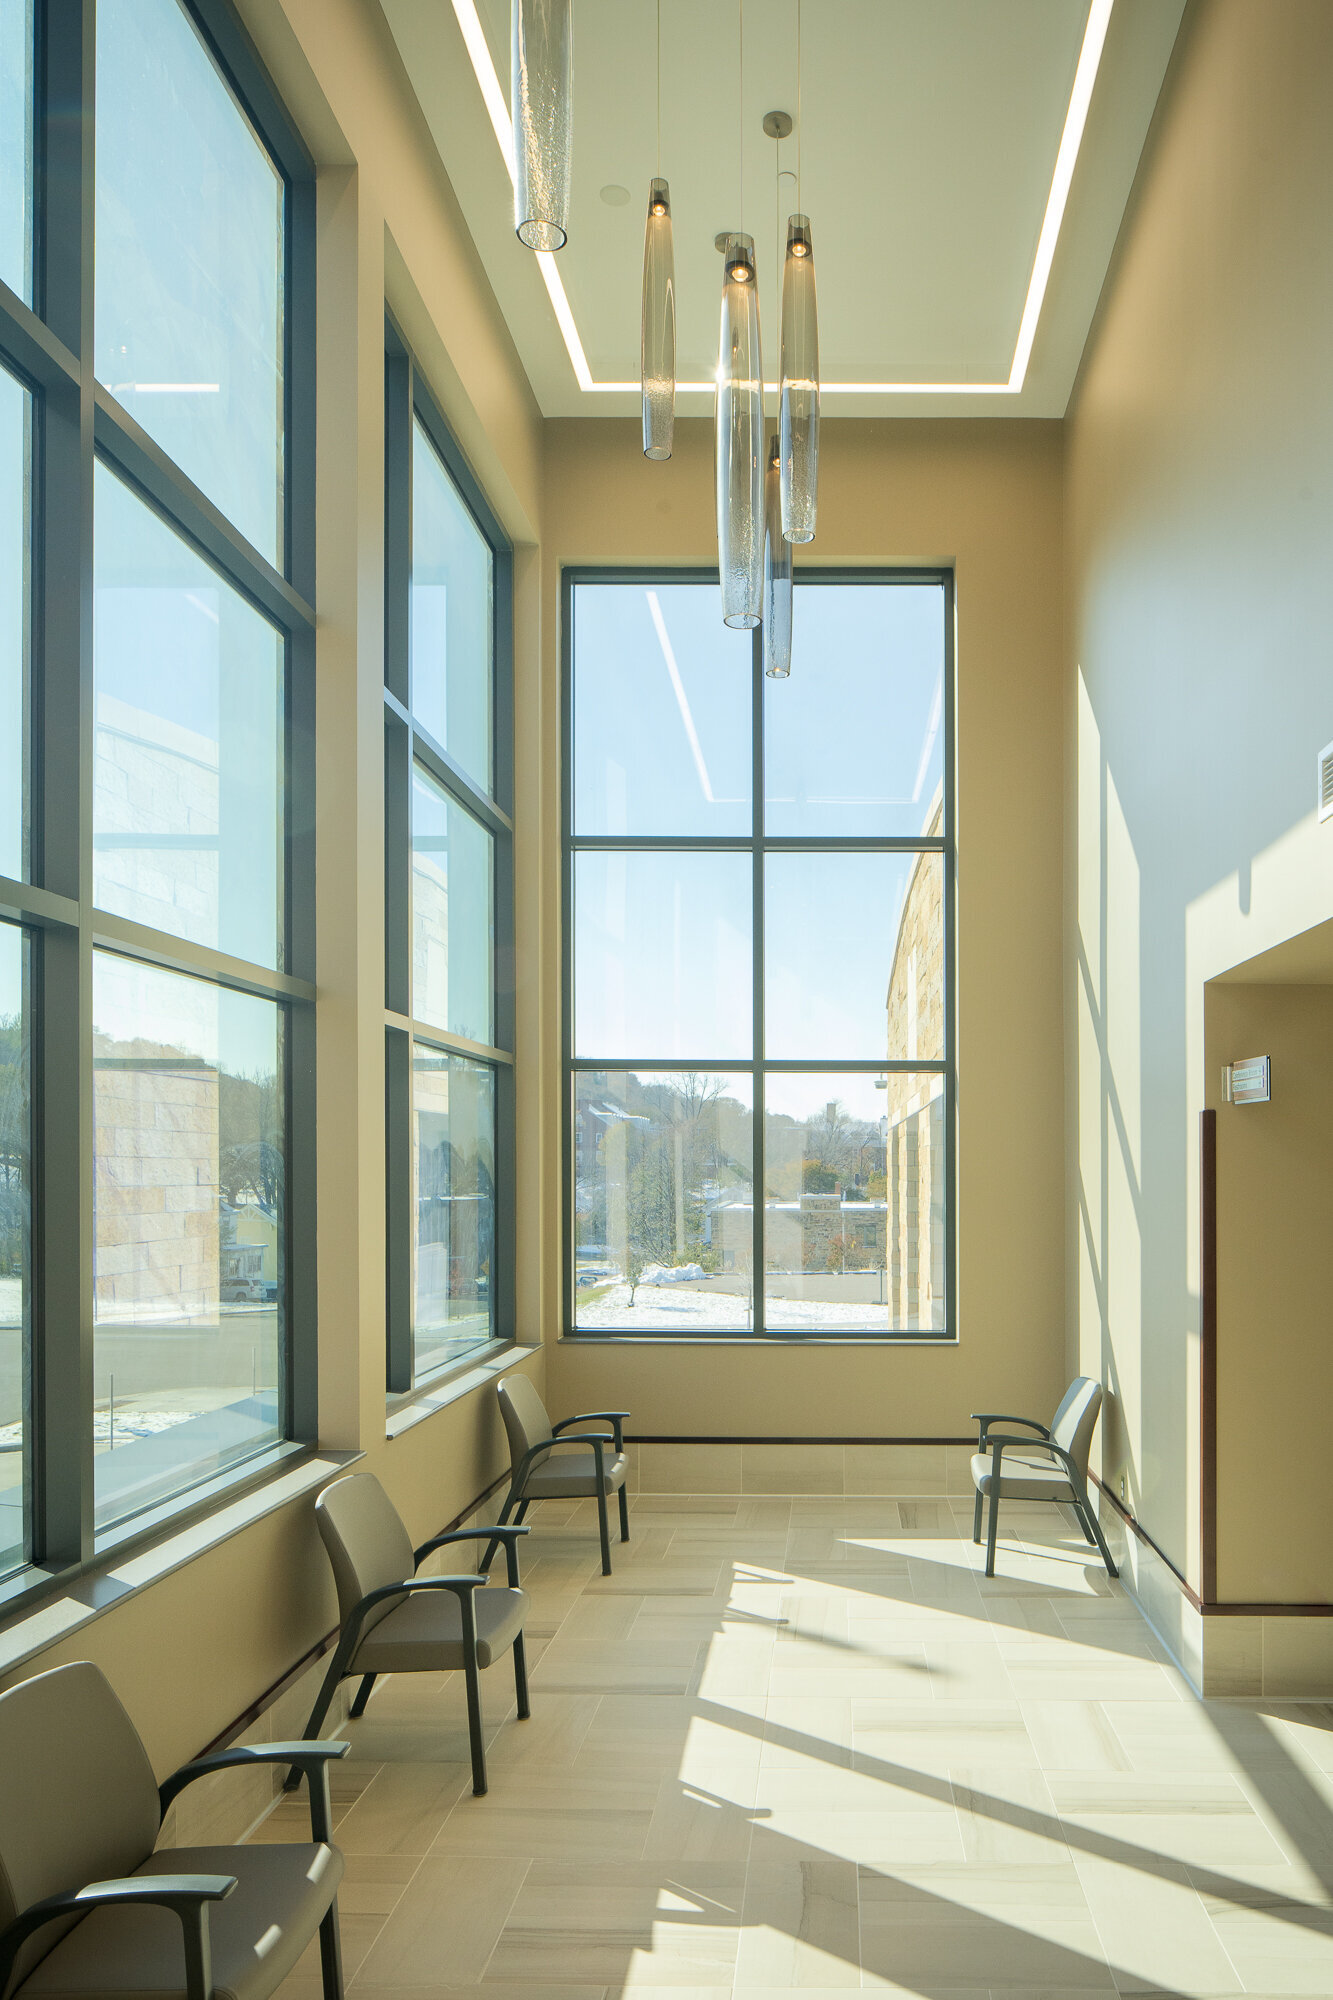 Beautiful natural light in this government building designed by ISG architecture firm in Mankato Minnesota